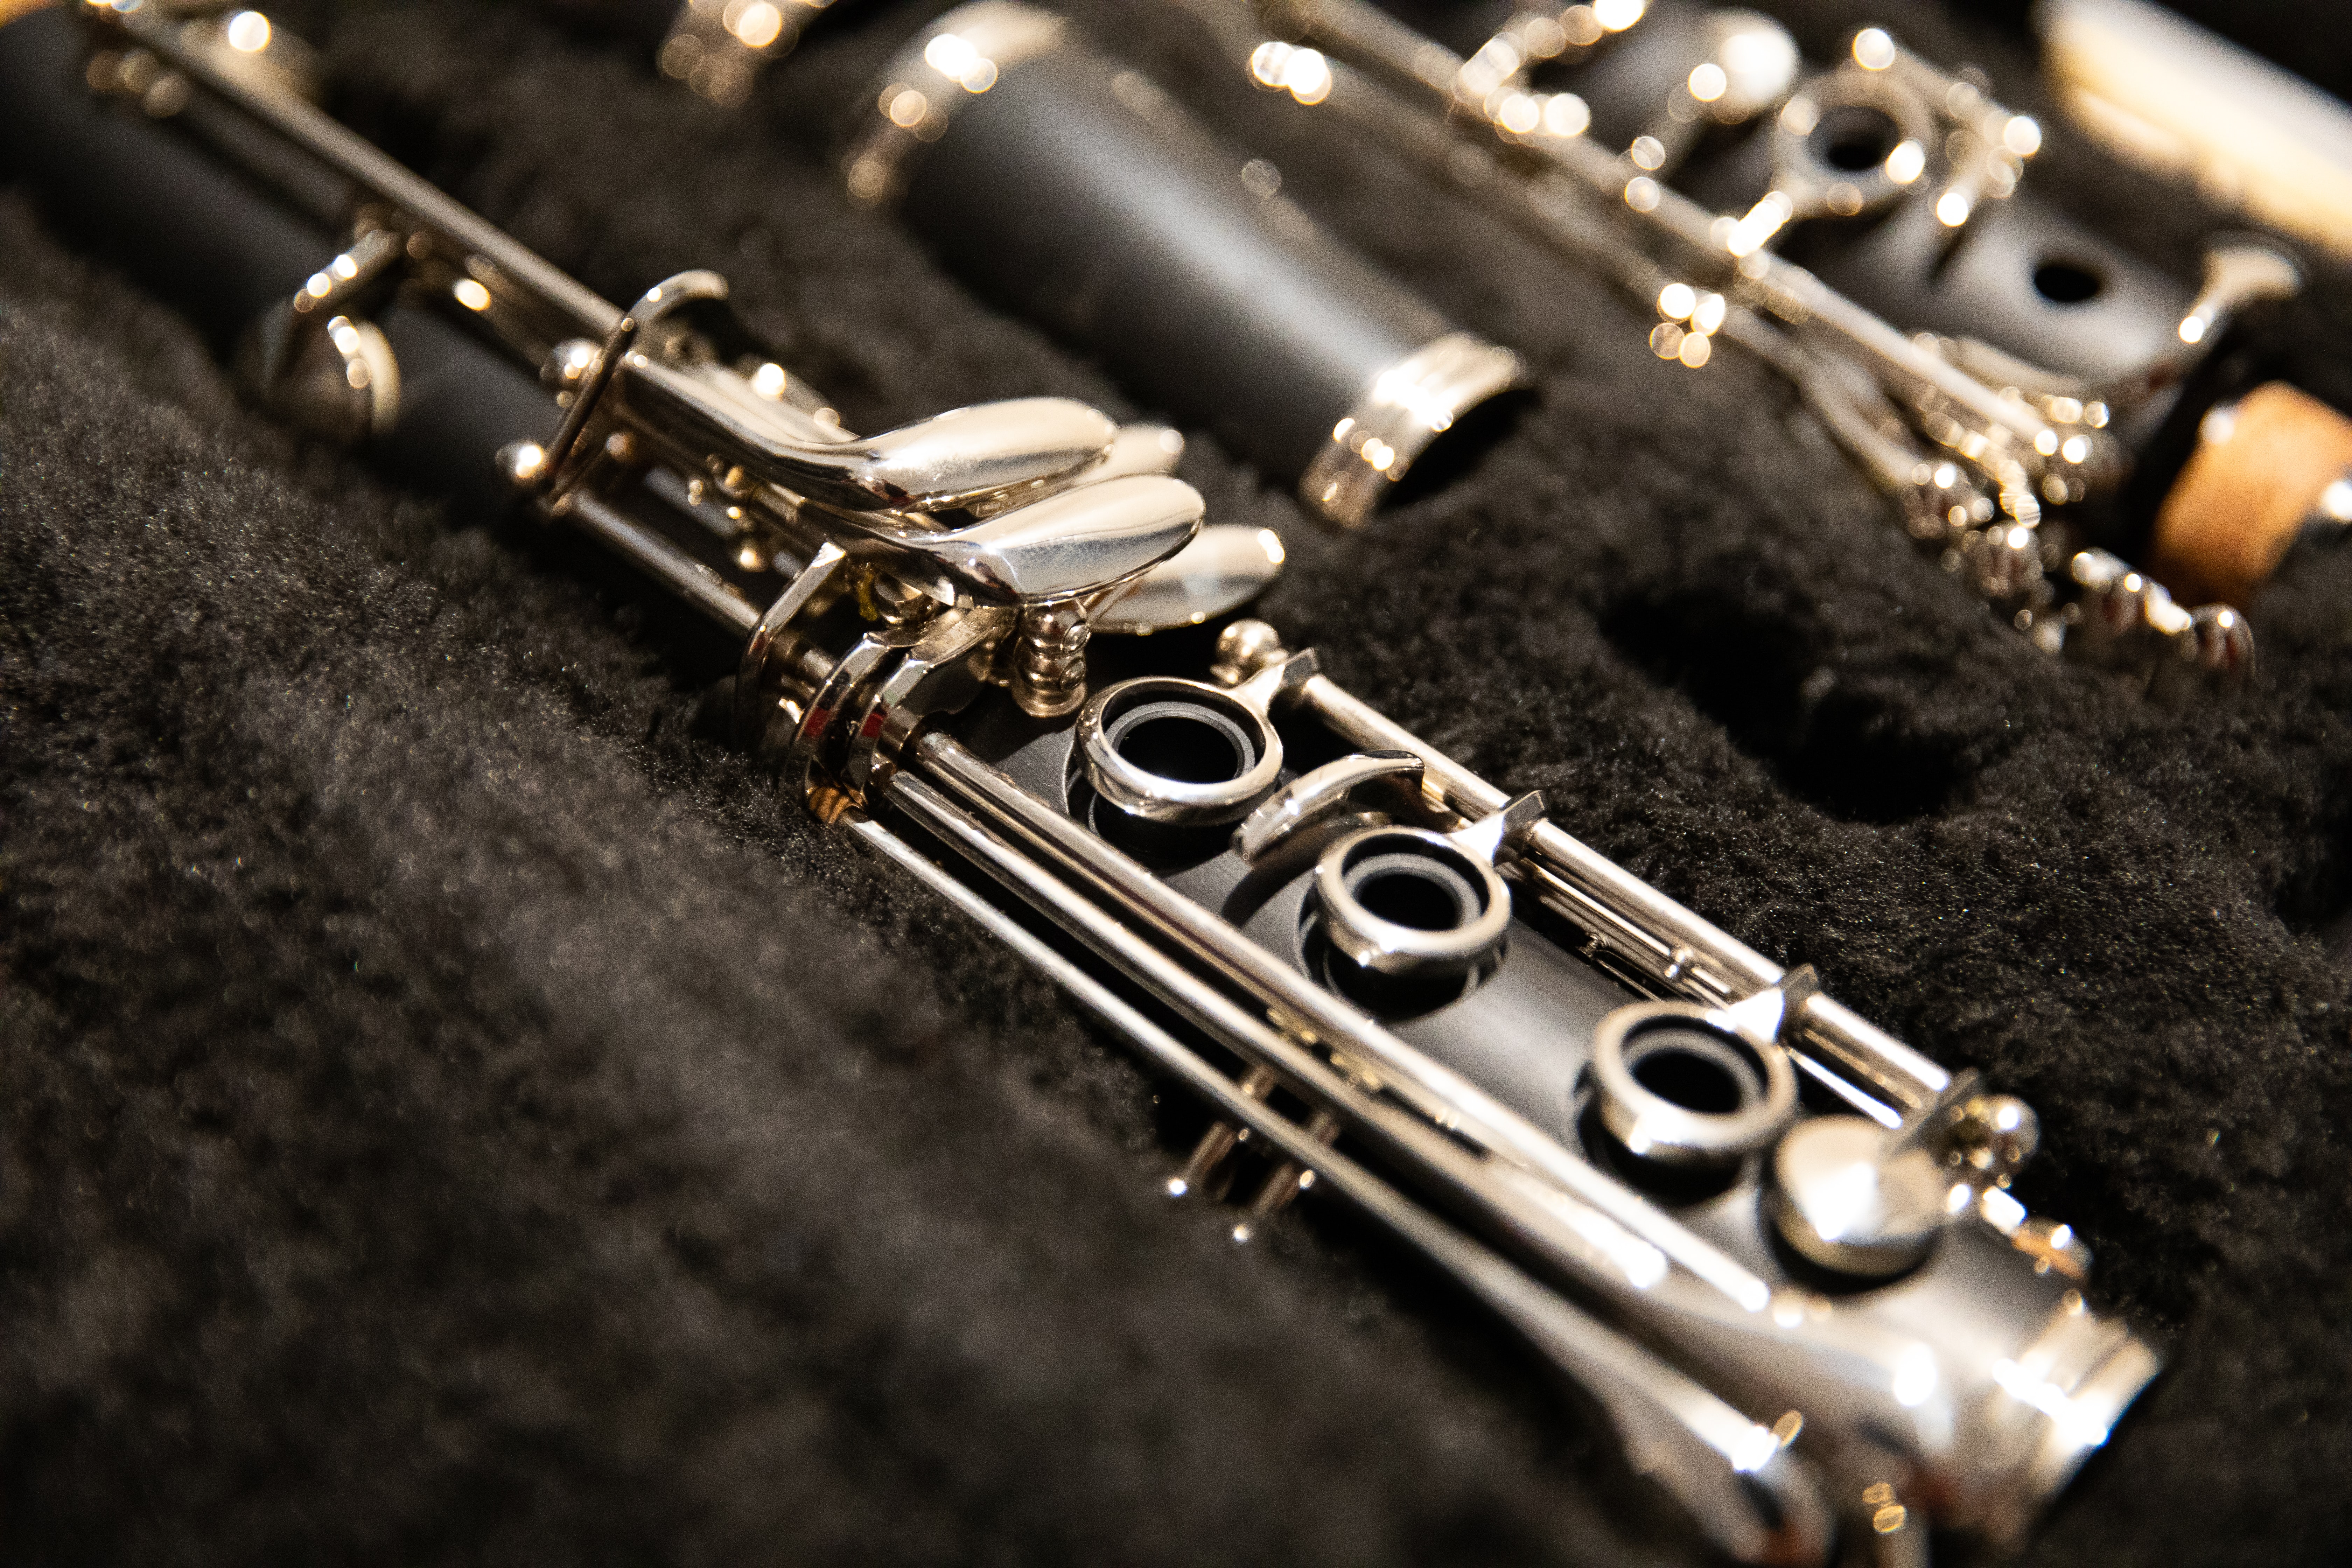 What to Buy: Navigating the Clarinet Options